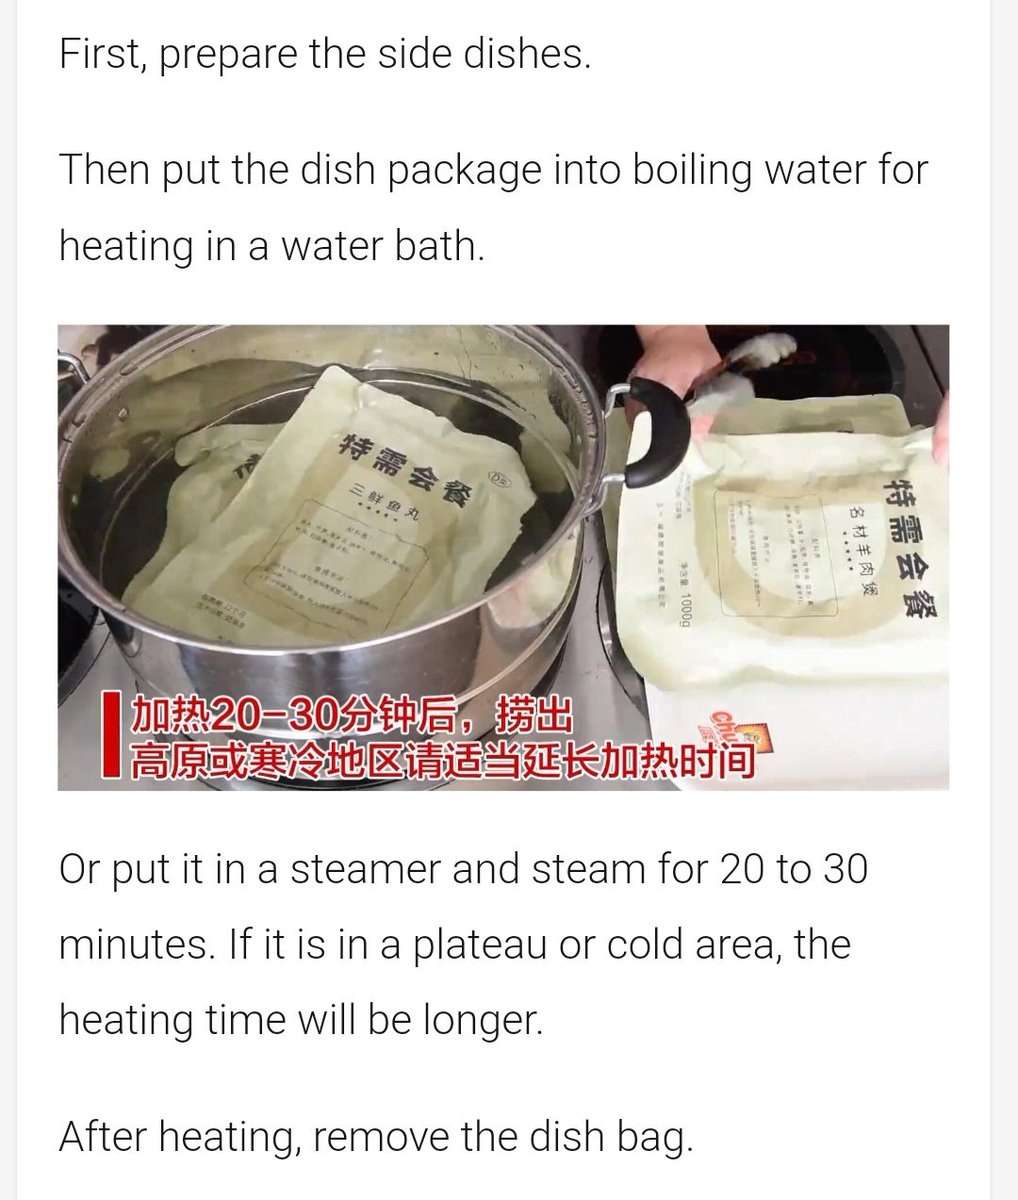 MRE has to be heated in boiling water which takes more time at higher altitudes